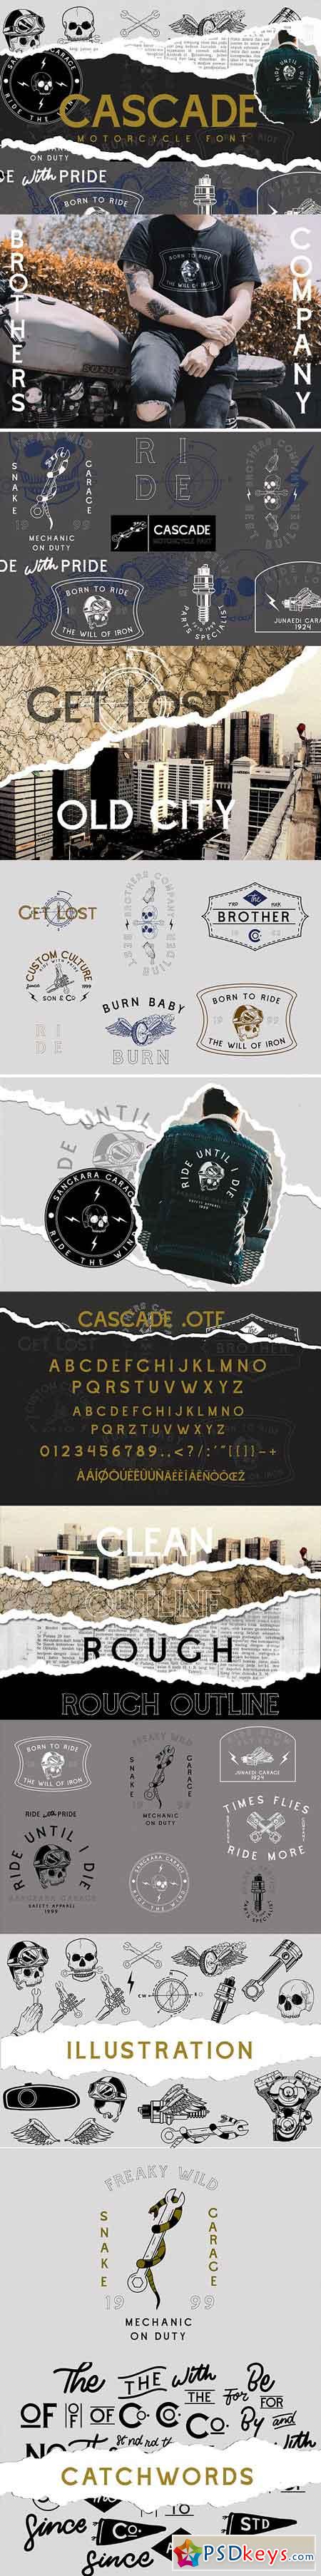 Cascade Motorcycle font 2609126